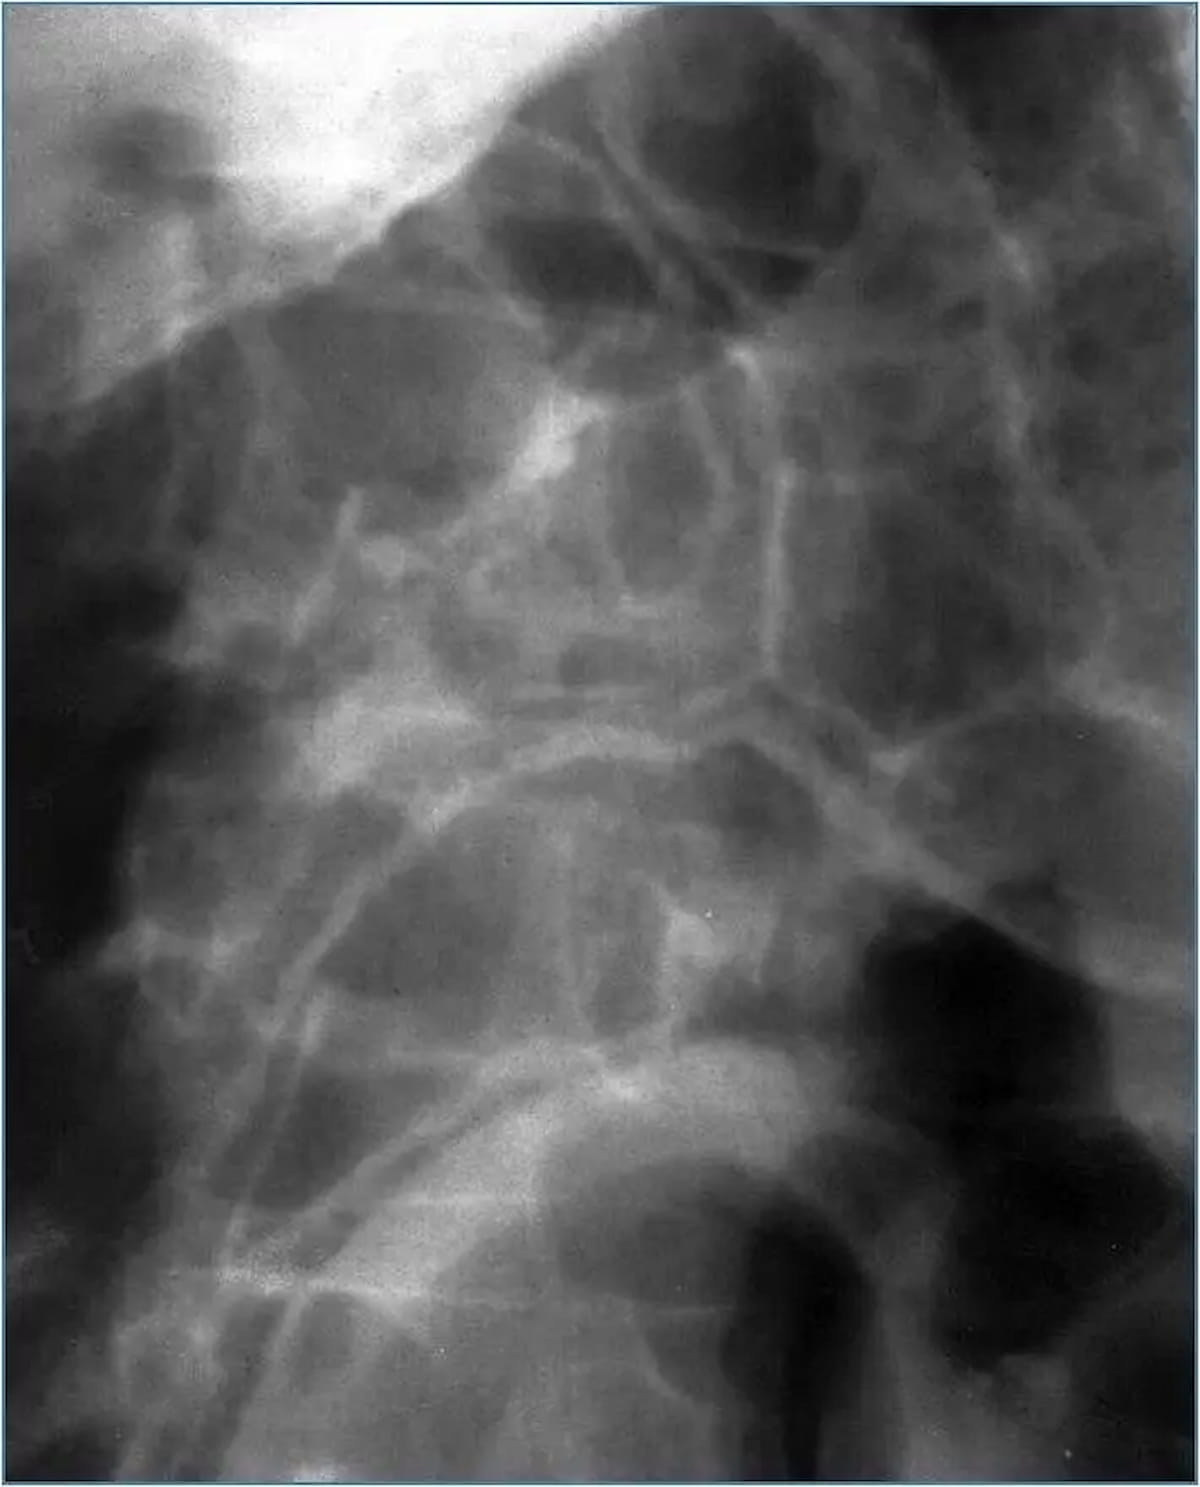 Image IQ Quiz: 42-Year-Old Patient with Acute Abdominal Pain and Fever